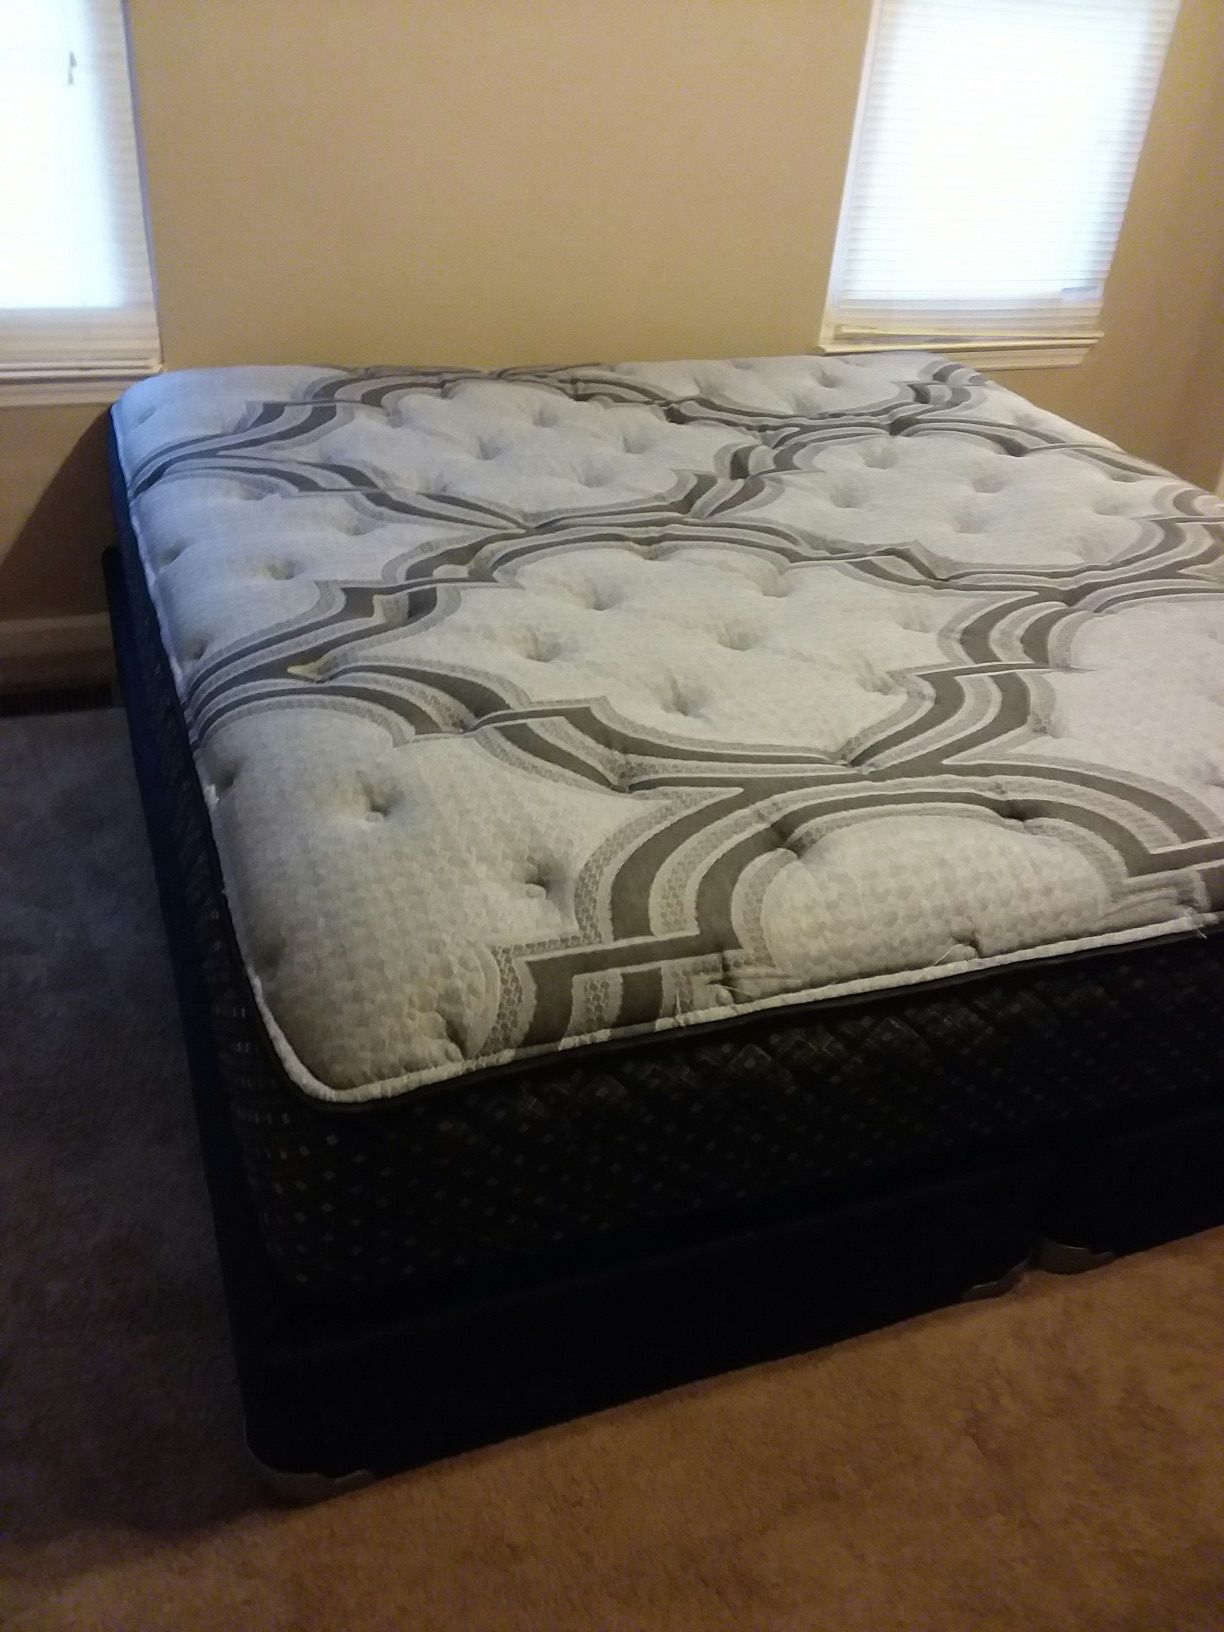 MATTRESS and BOX SPRINGS as sets or separately